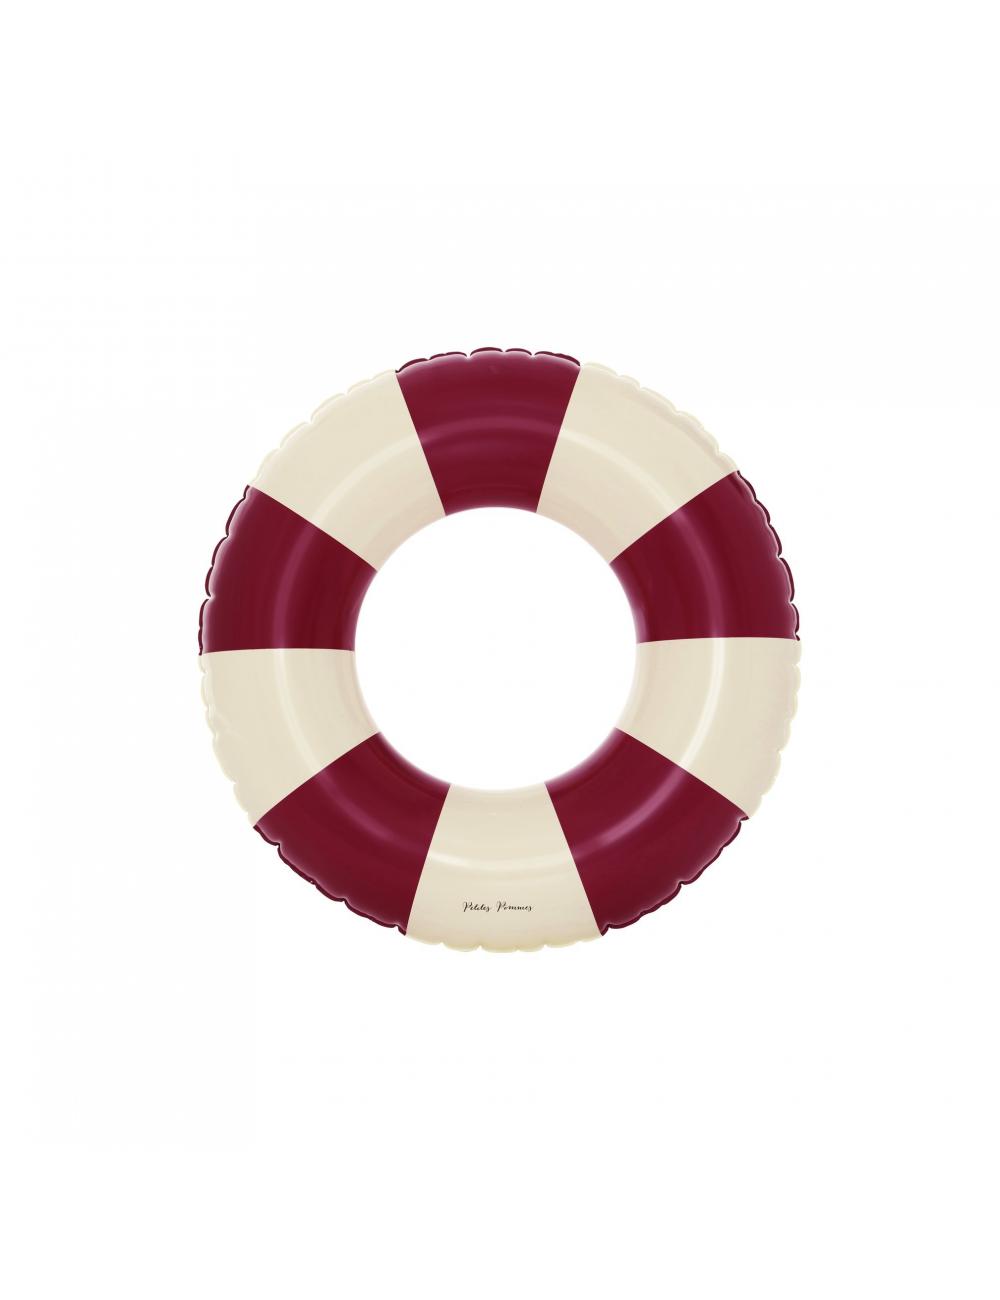 baby swim ring Petites Pommes, ruby red, 45 cm, 1-3 years 1